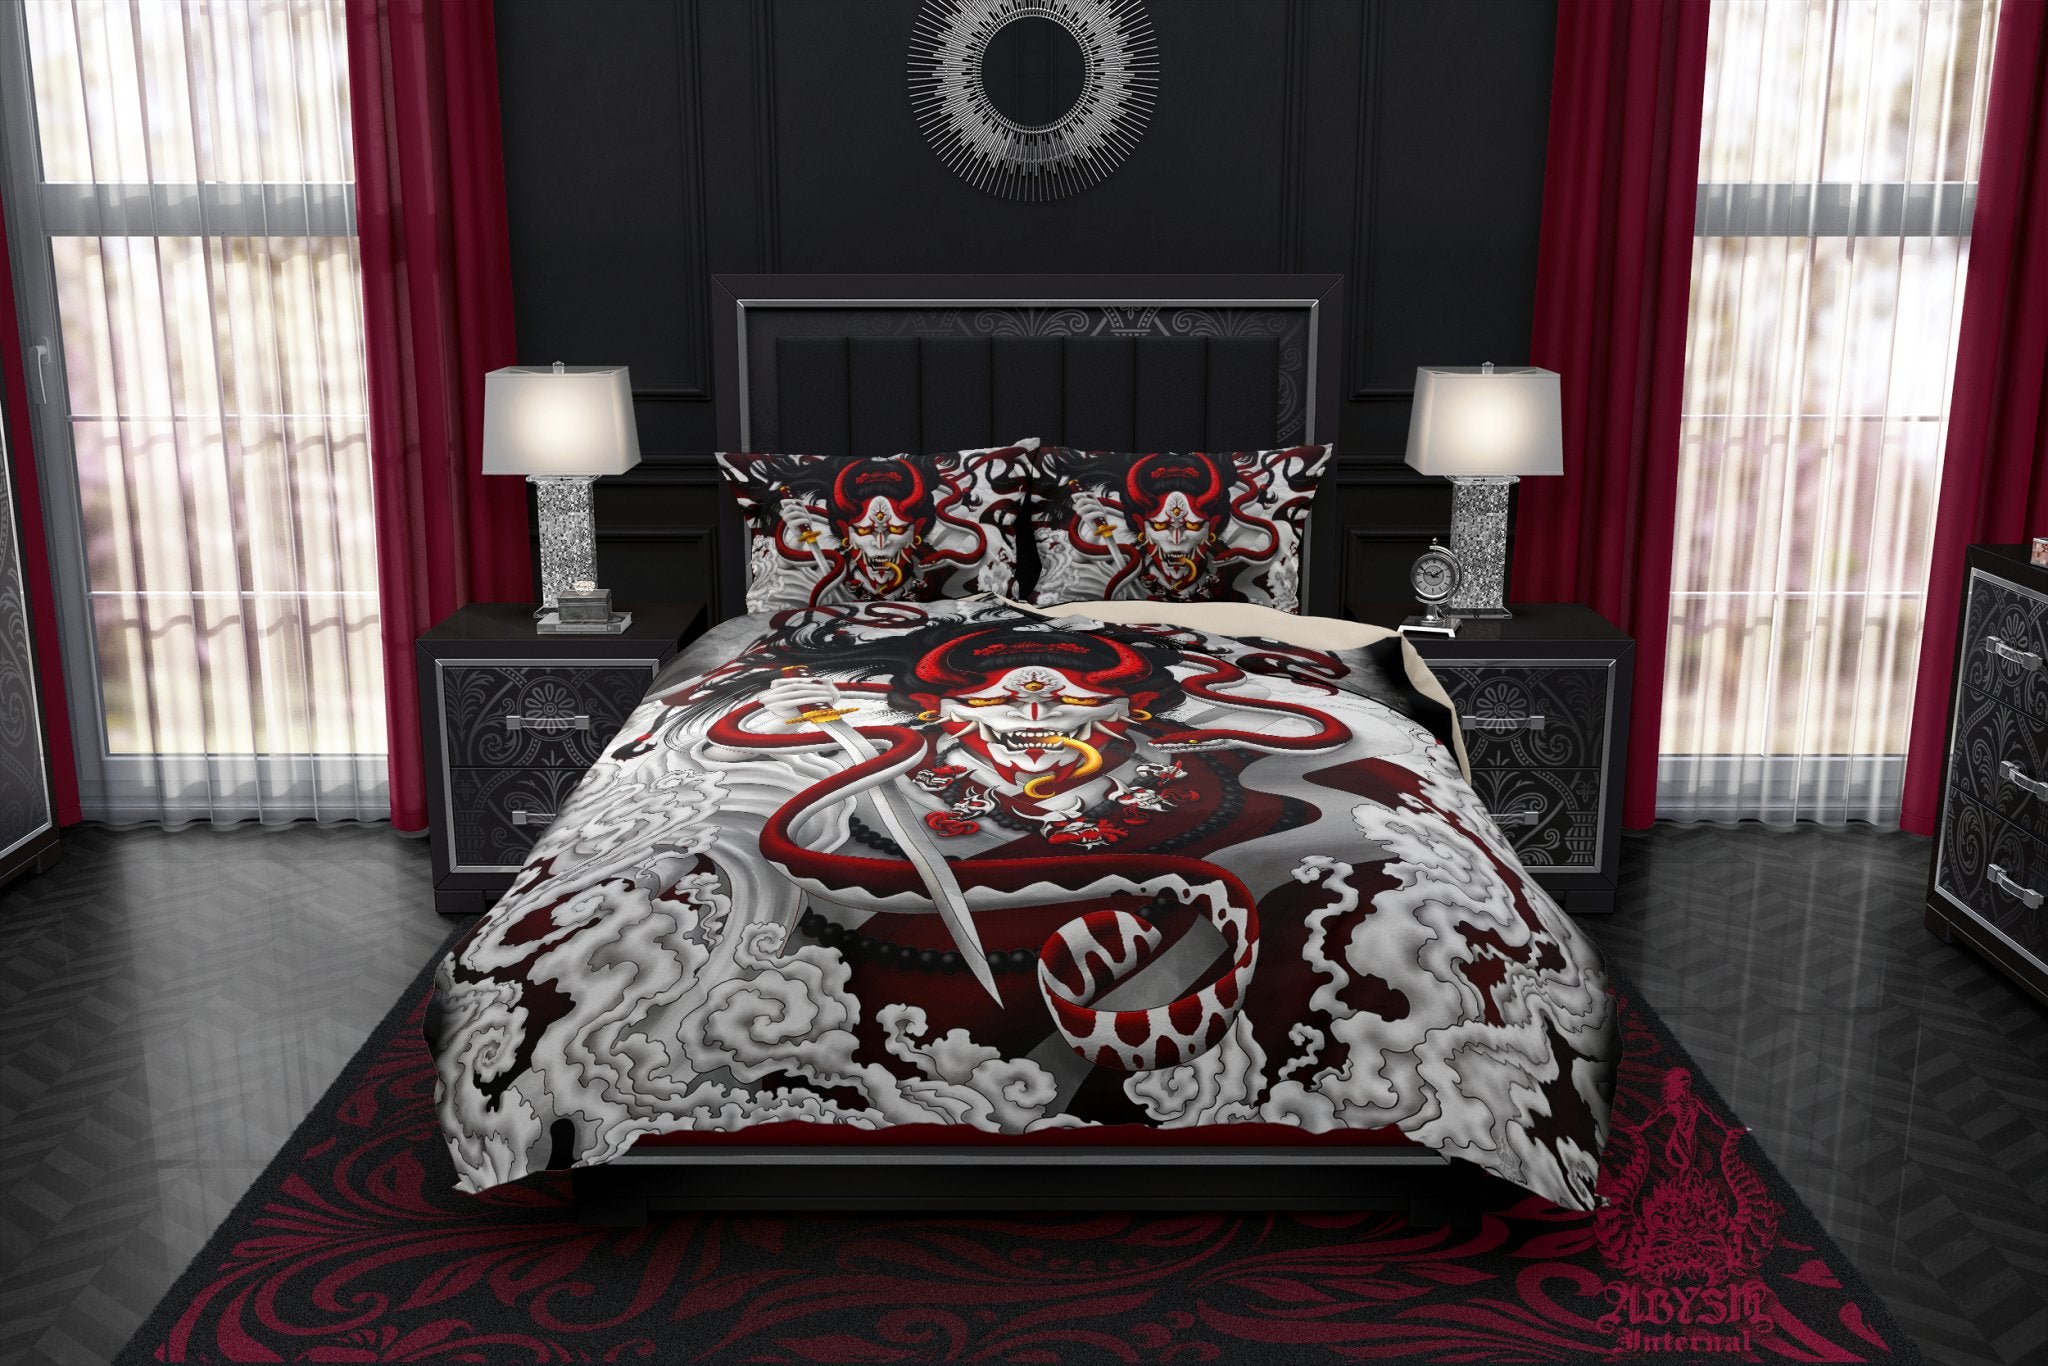 Hannya Bedding Set, Comforter or Duvet, Anime Bed Cover, Bloody White Goth Bedroom Decor, King, Queen & Twin Size - Red Snake and Japanese Demon - Abysm Internal